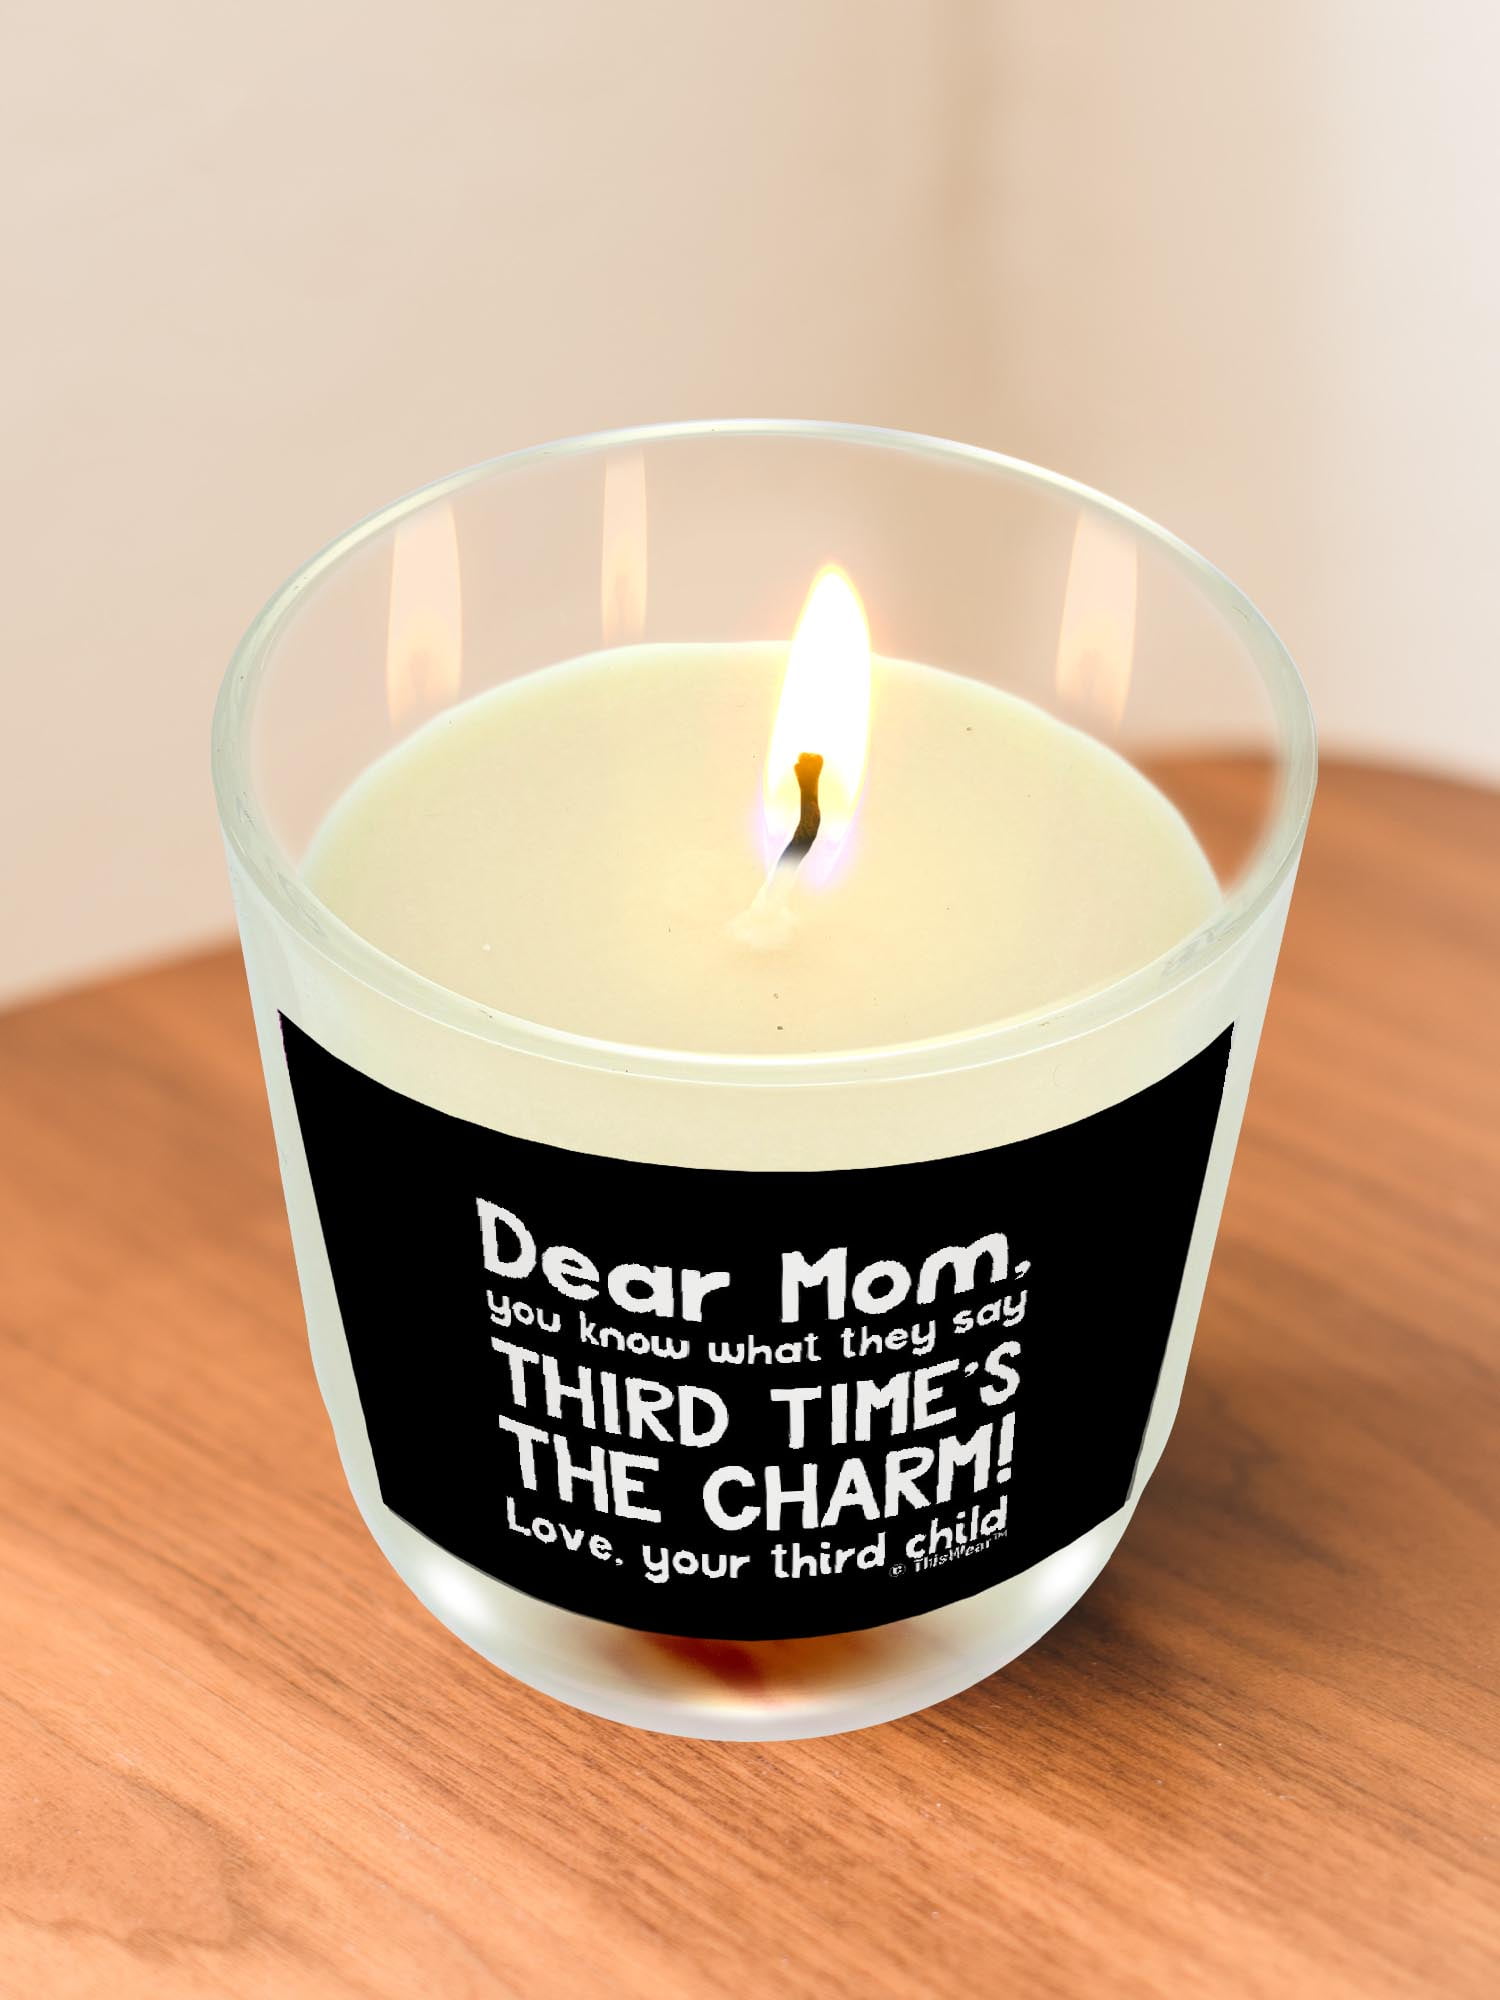 TRIENCY Personalized Mom Candle I Hope This Candle Smells Better Jar  Scented Candles 9 Oz Funny Mom Gifts from Son Daughter Best Present for  Birthday